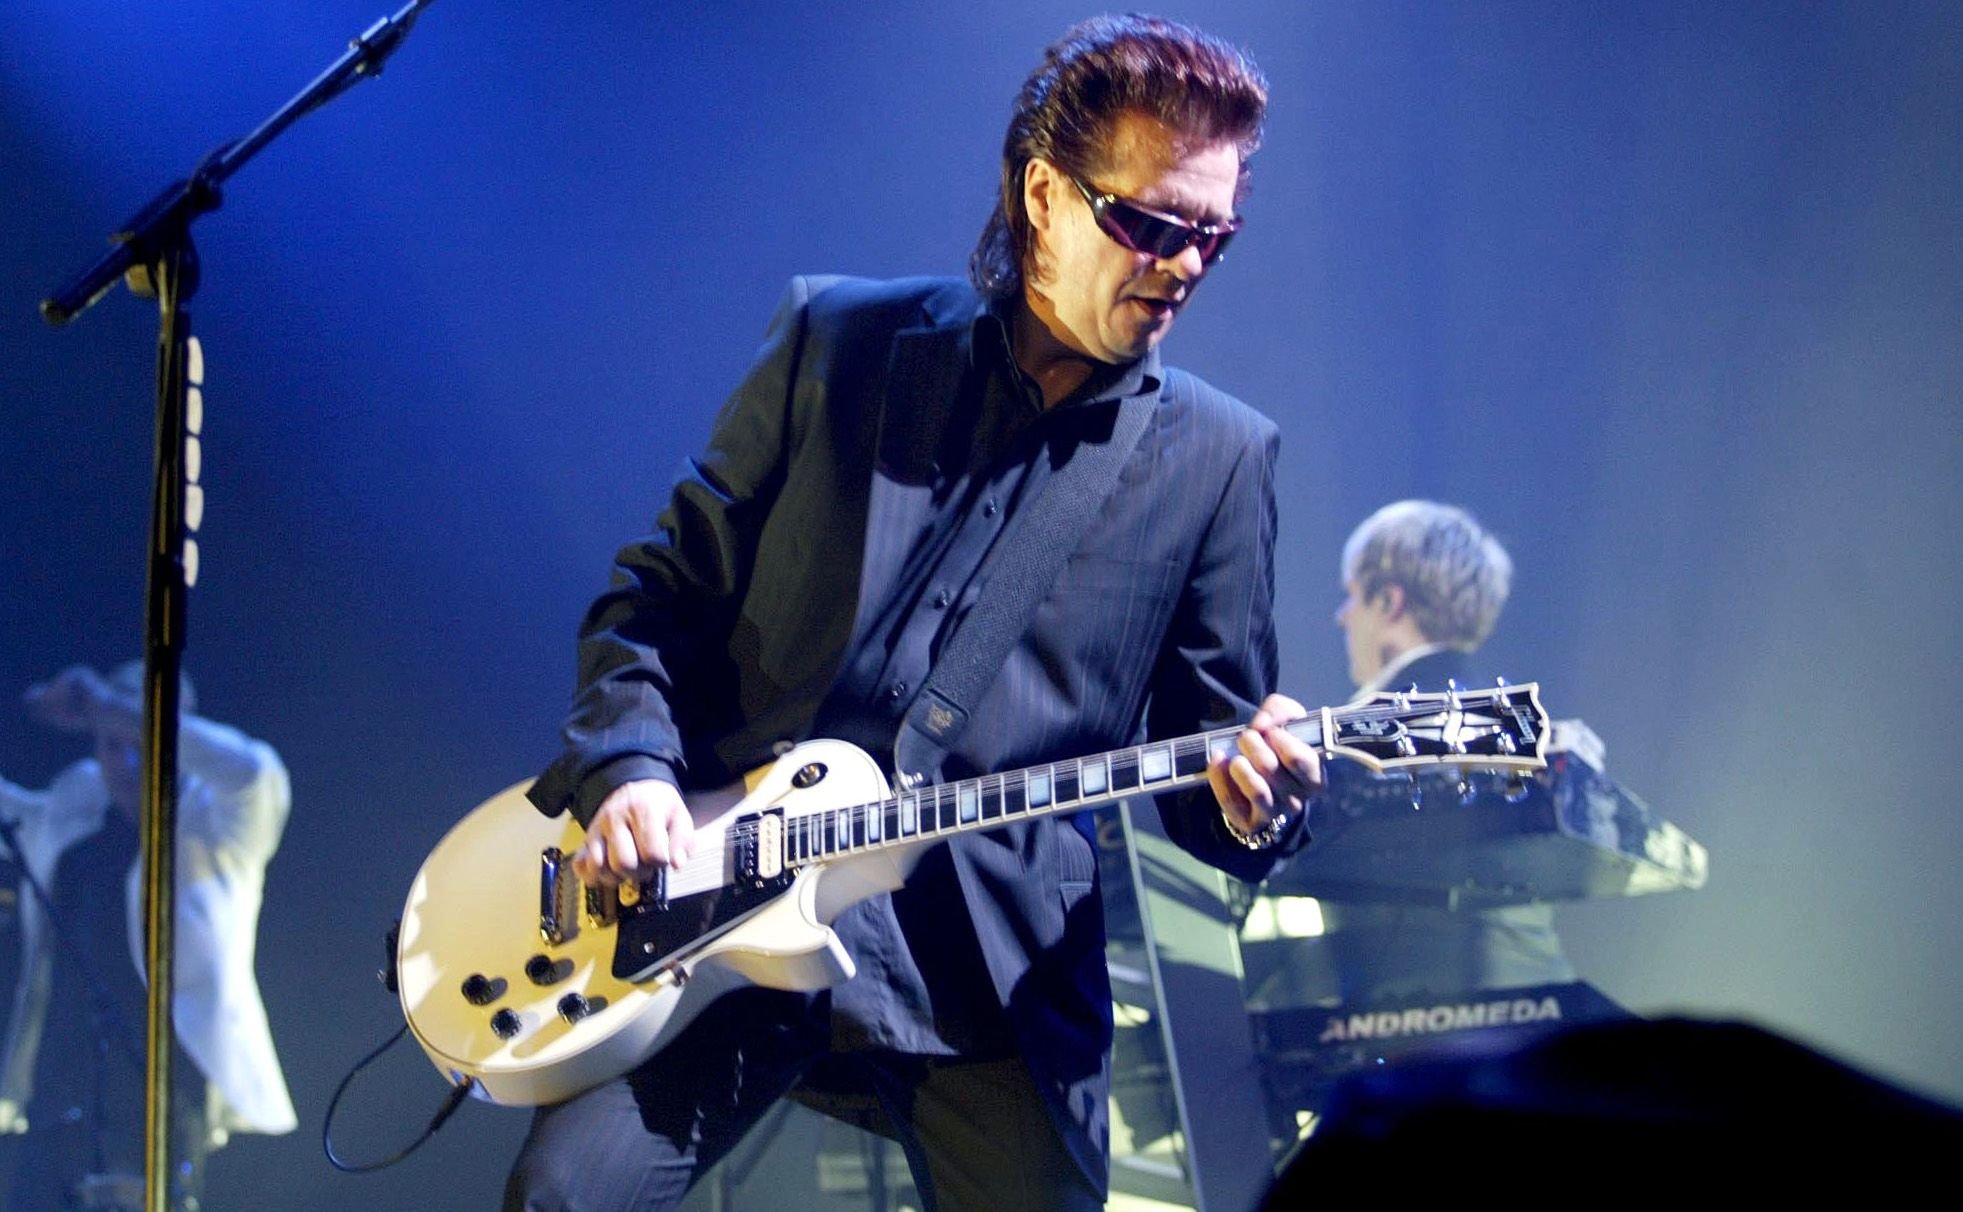 Happy birthday wishes today go out to Andy Taylor of Duran Duran! 